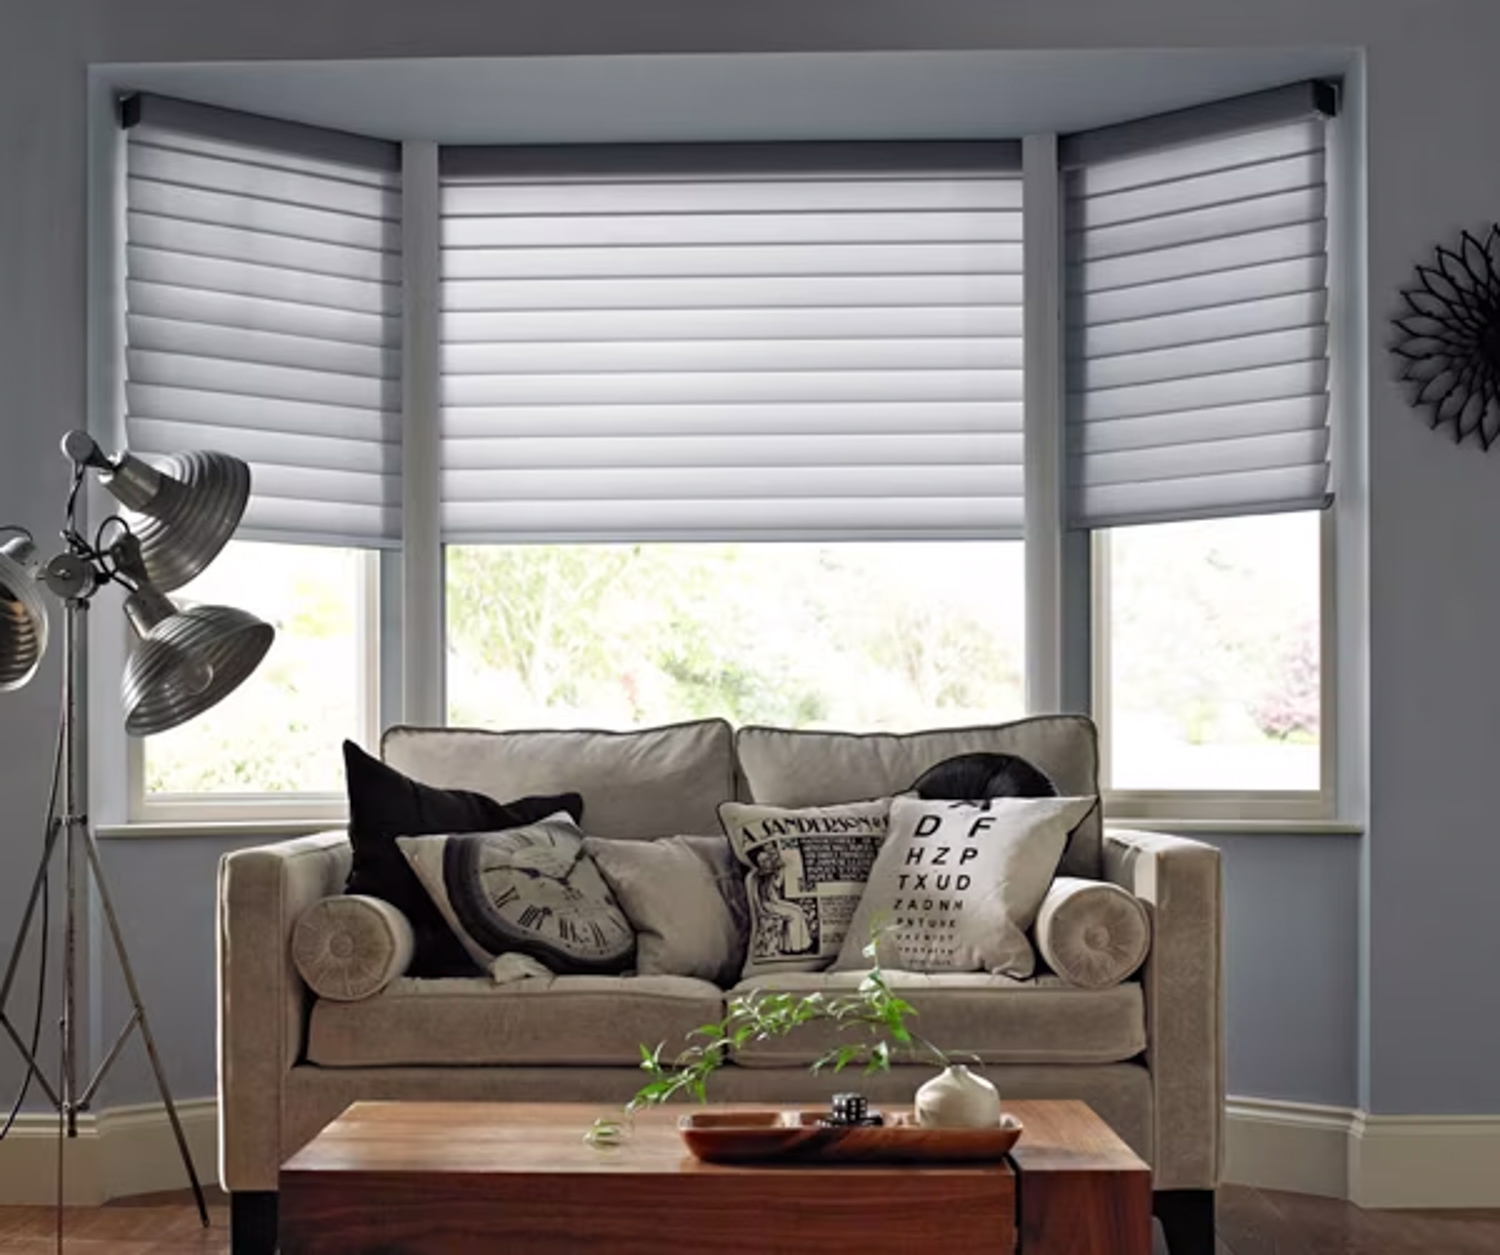 Lounge area with seating and window treatments, highlighting Hunter Douglas Silhouette® Sheer Shades.